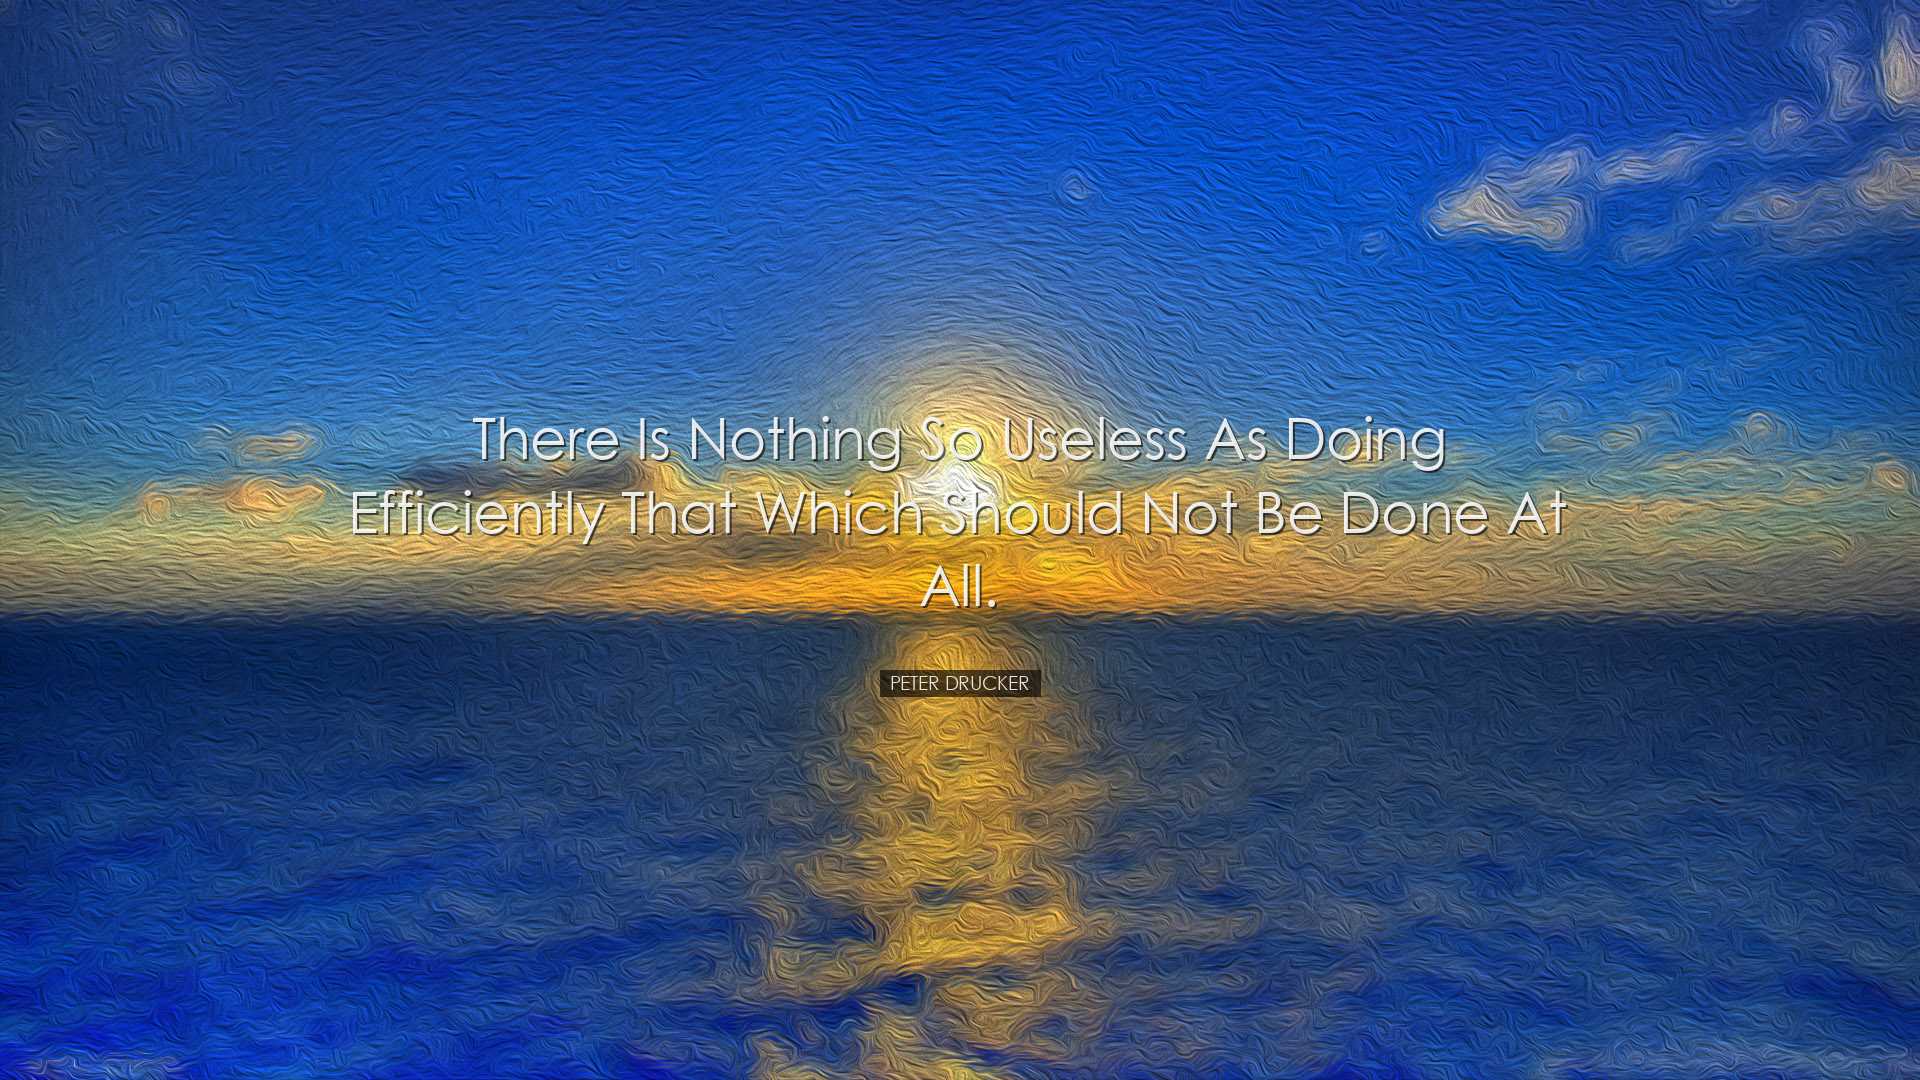 There is nothing so useless as doing efficiently that which should